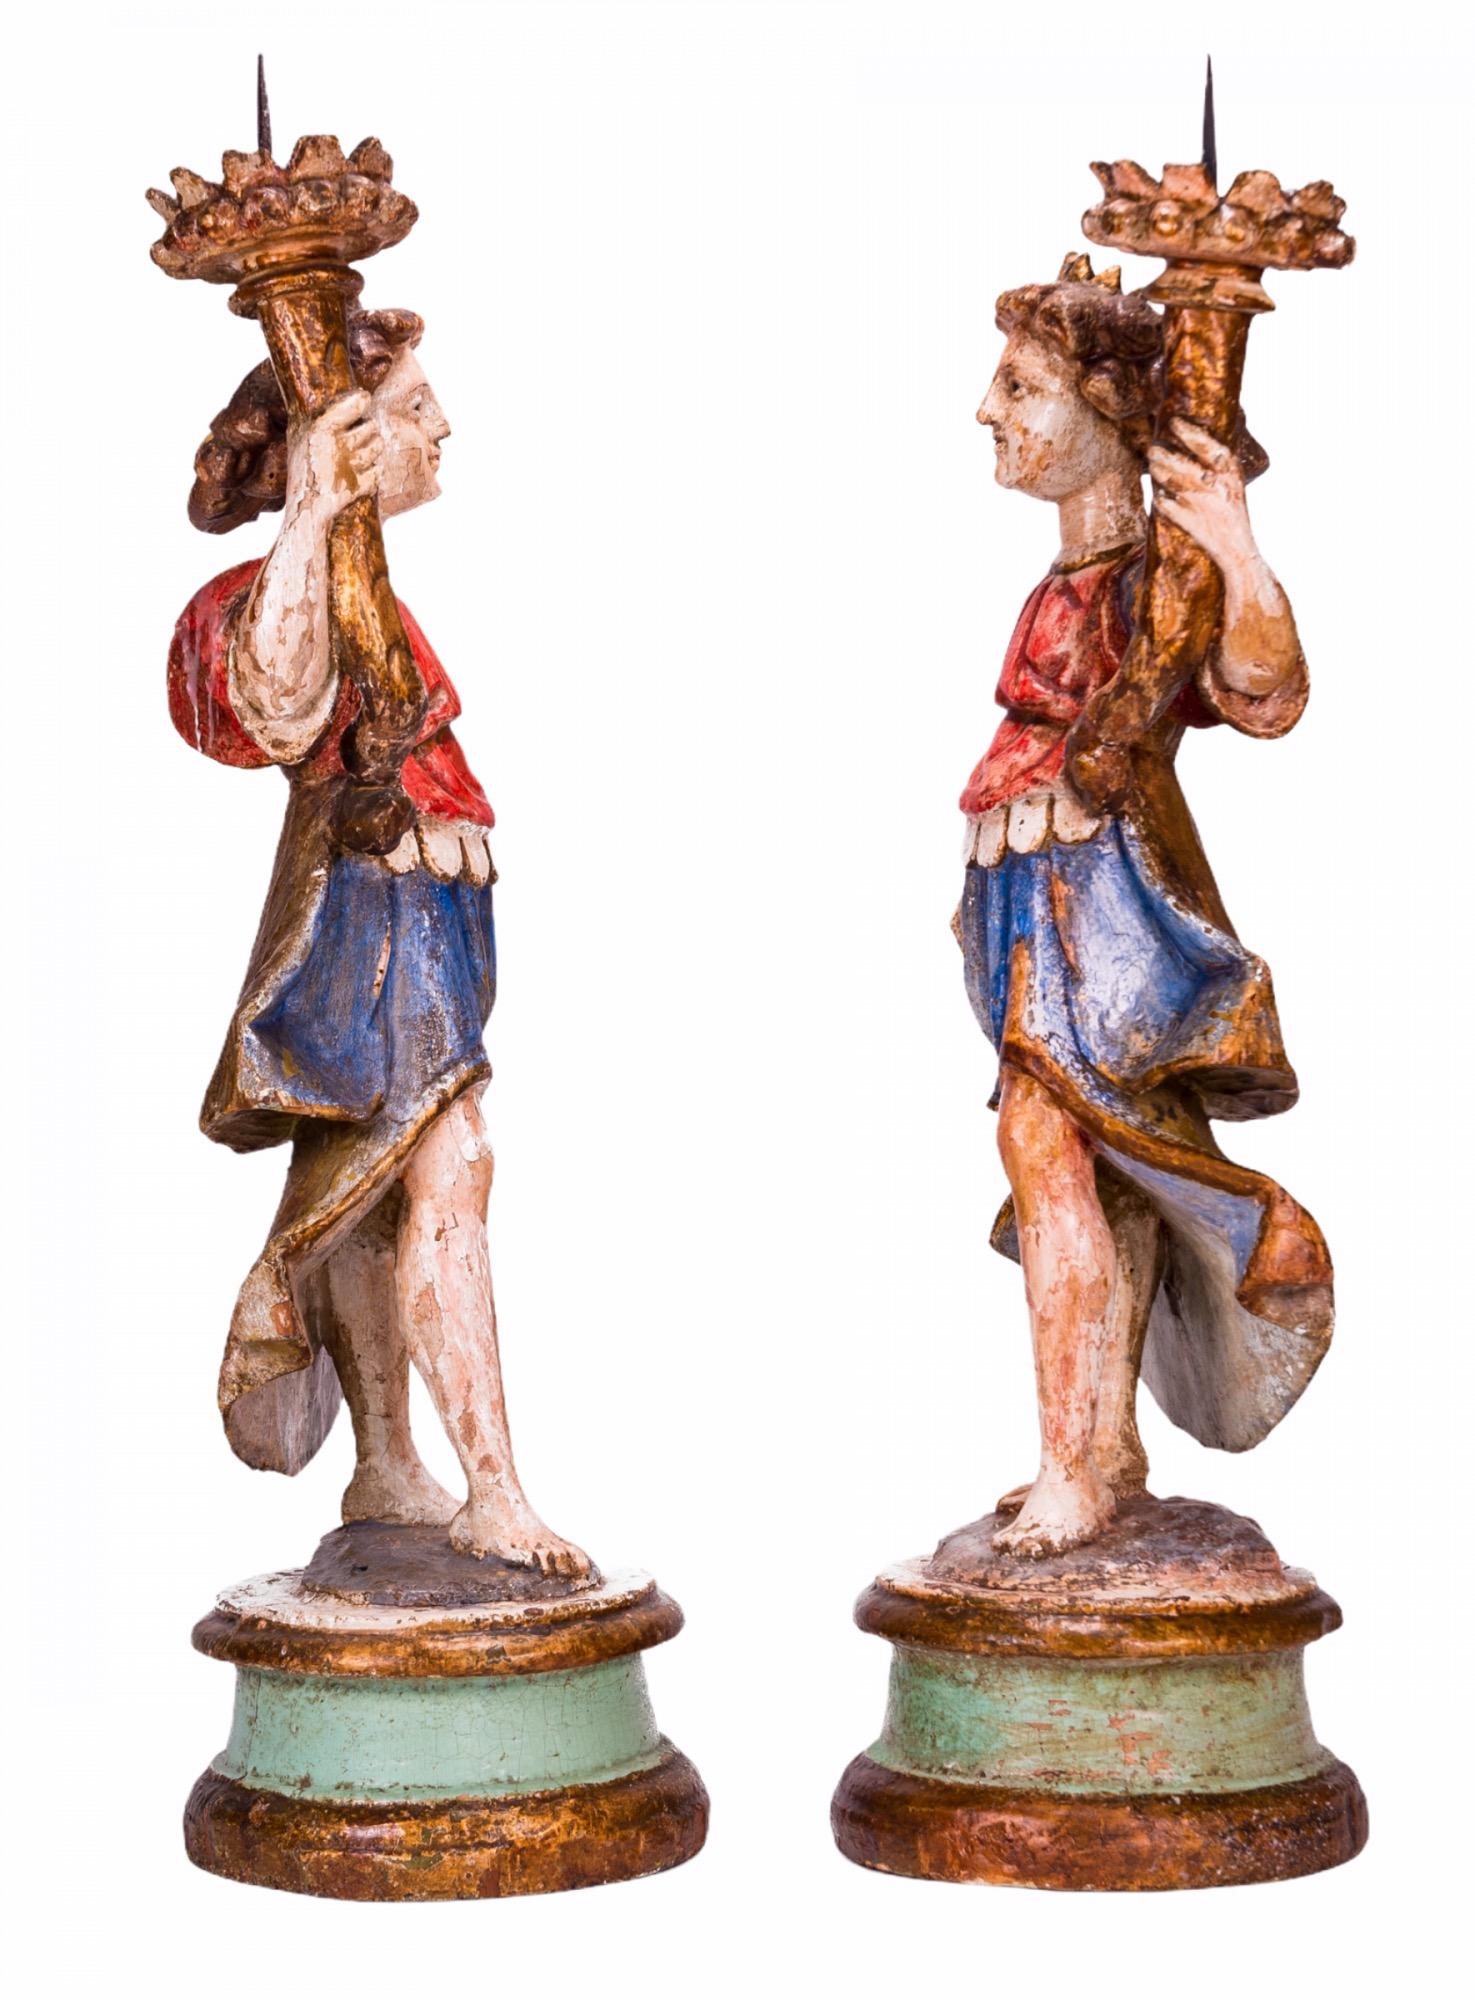 A pair of early 17th Century Baroque polychromed carved wood Angel sculptures with torch shaped candleholders.